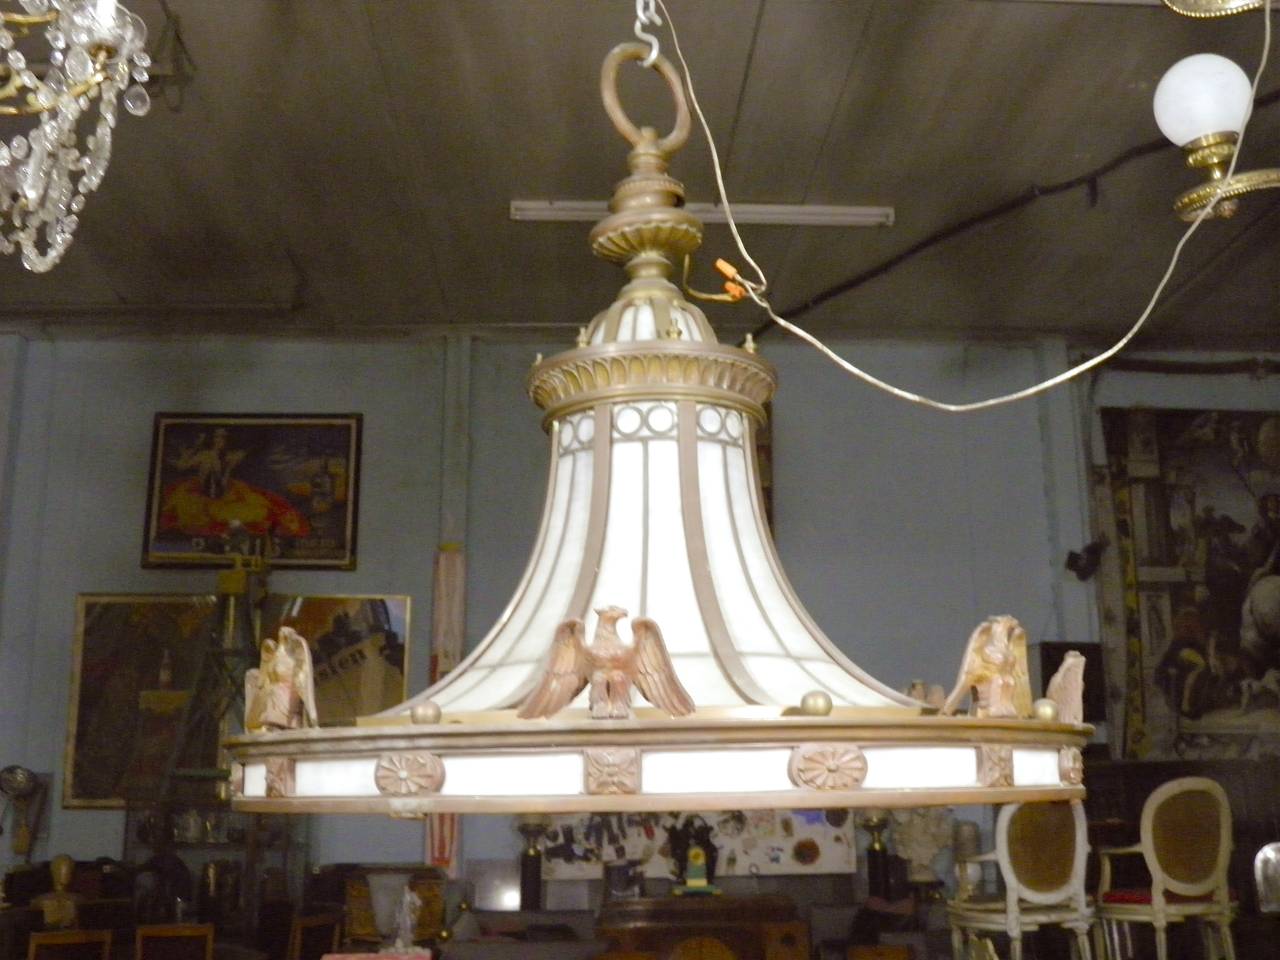 A 1900-1929 rare magnificent grand scale lobby chandelier by Edward F. Caldwell, a tour de force of American foundry cast and hand finished bronze and leaded glass fabrication, very heavy aged bronze vintage glass chandelier light pendant, featuring